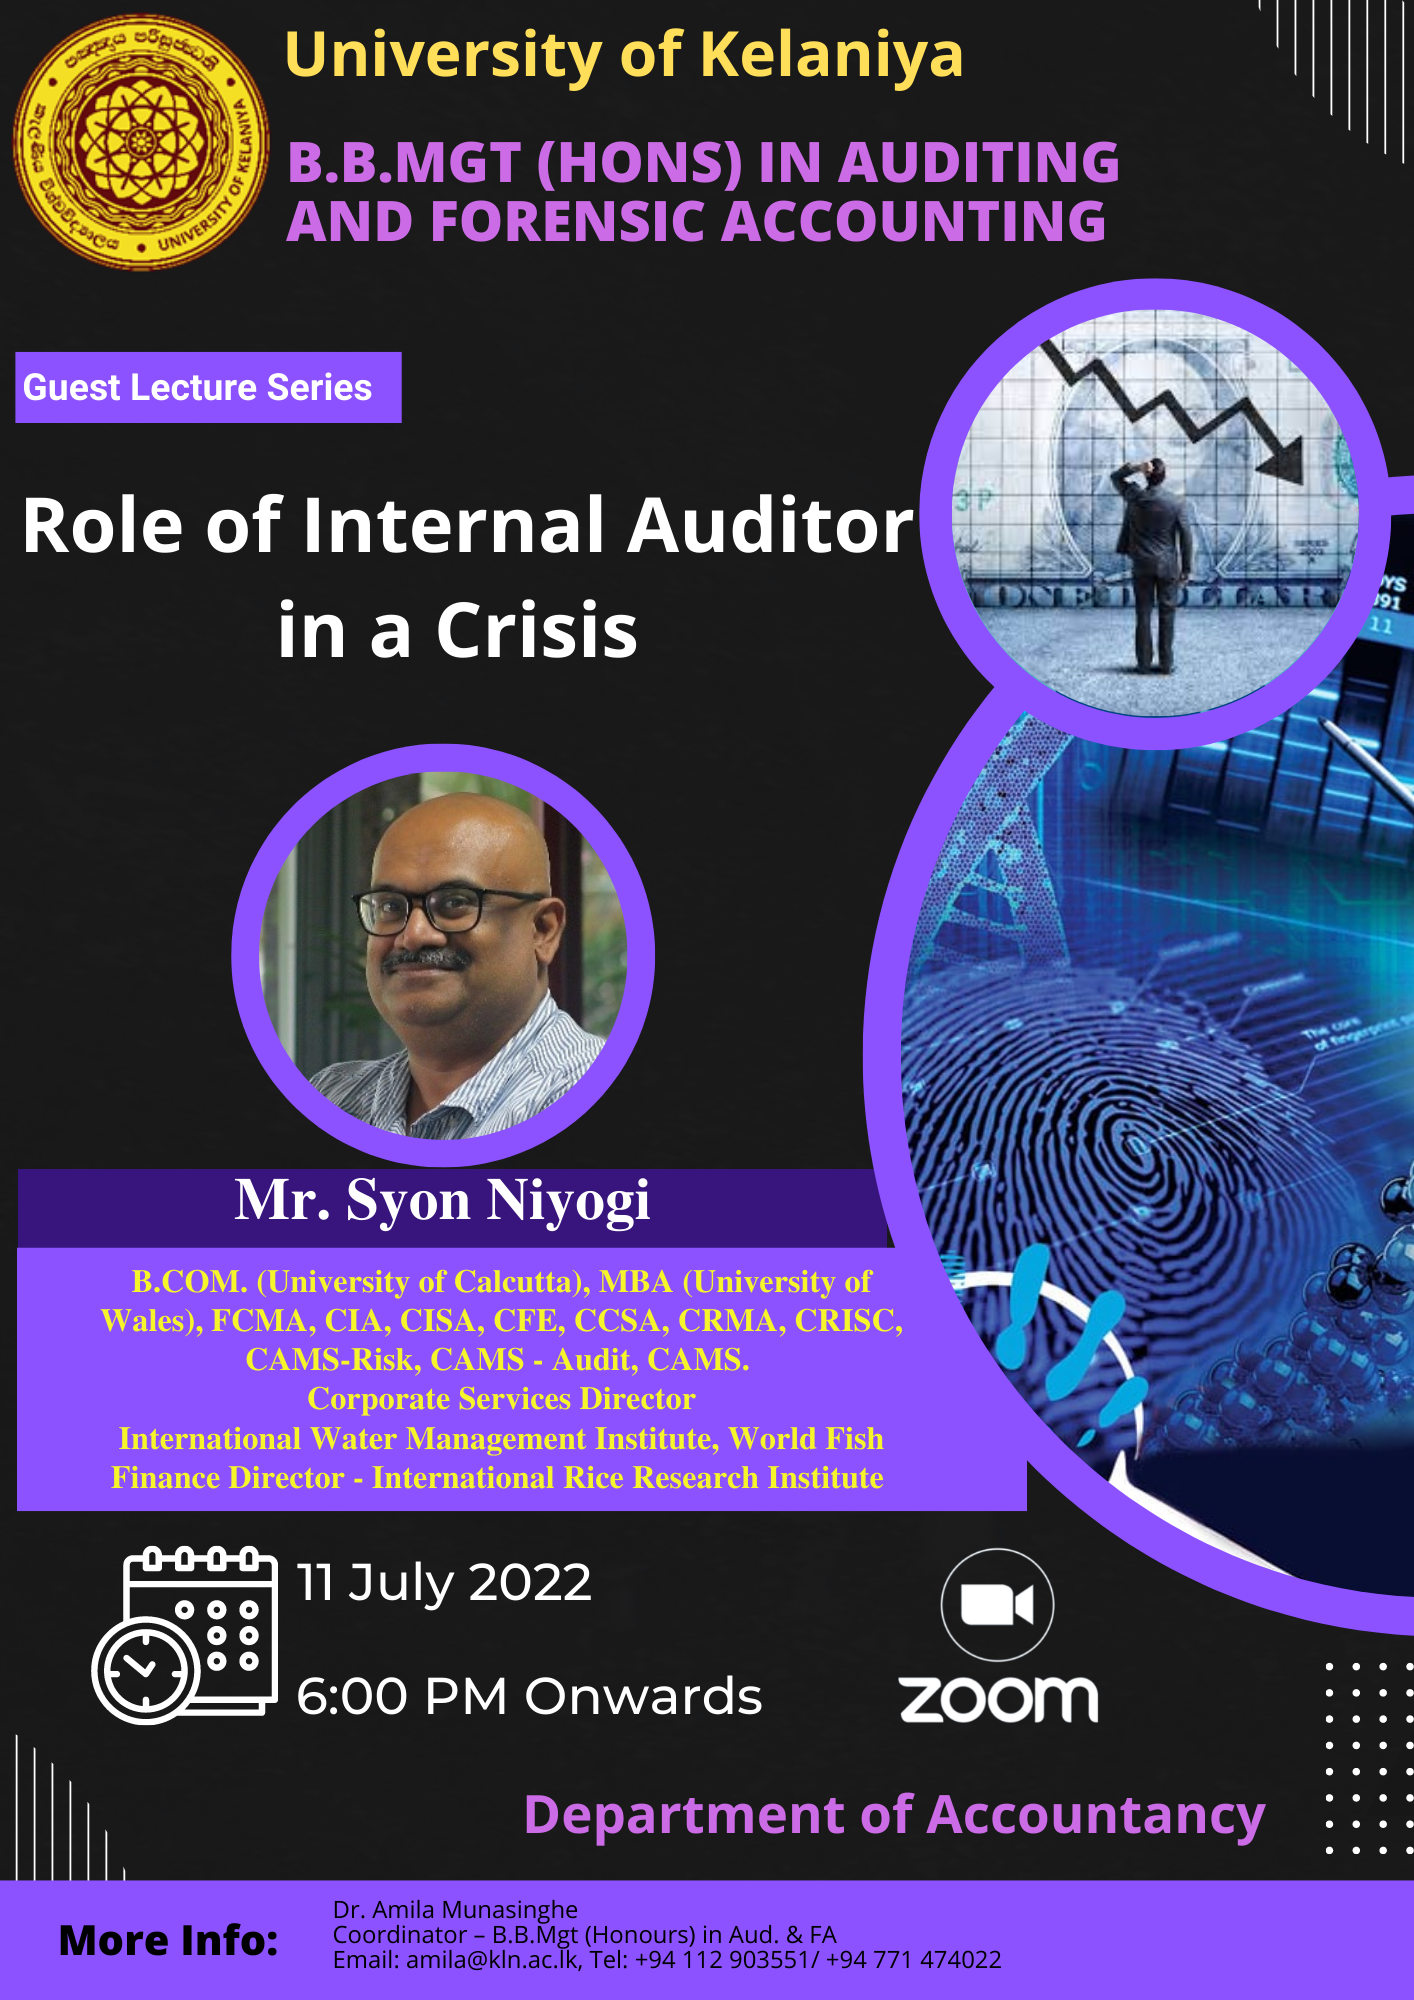 Guest lecture series; Role of Internal Auditor in a Crisis